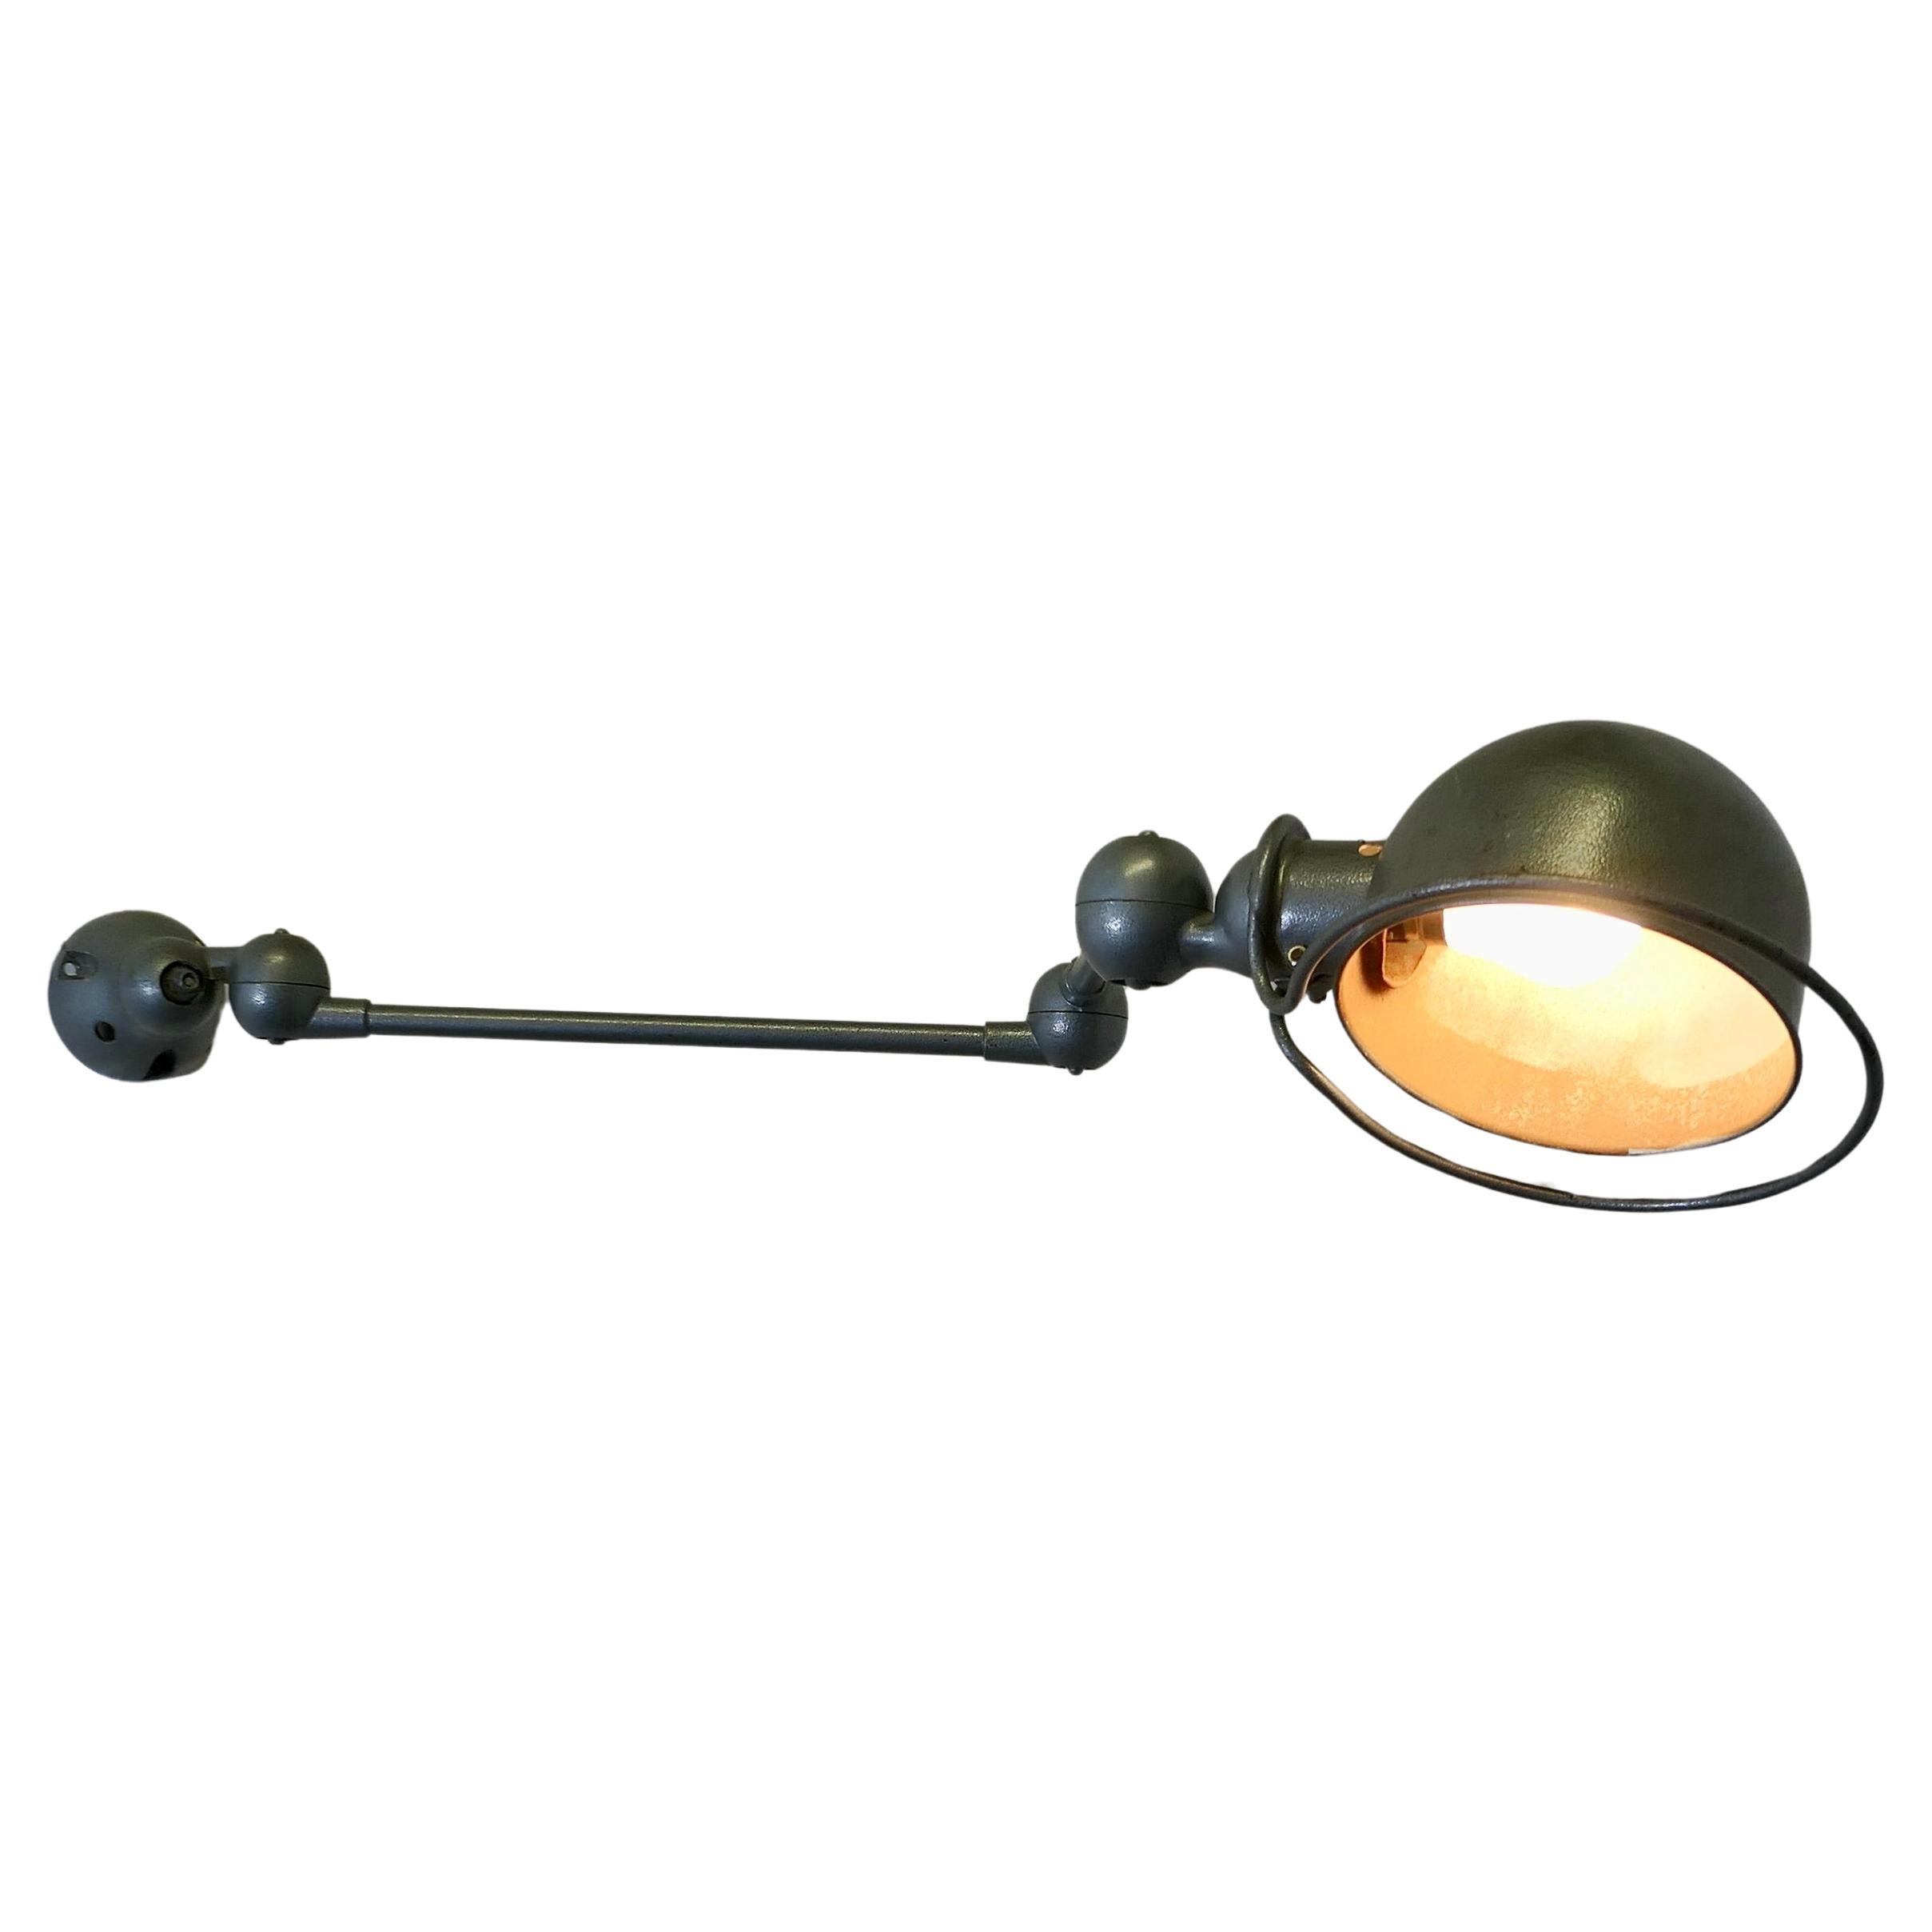 French Vintage Industrial Articulated Wall Light Sconce    For Sale